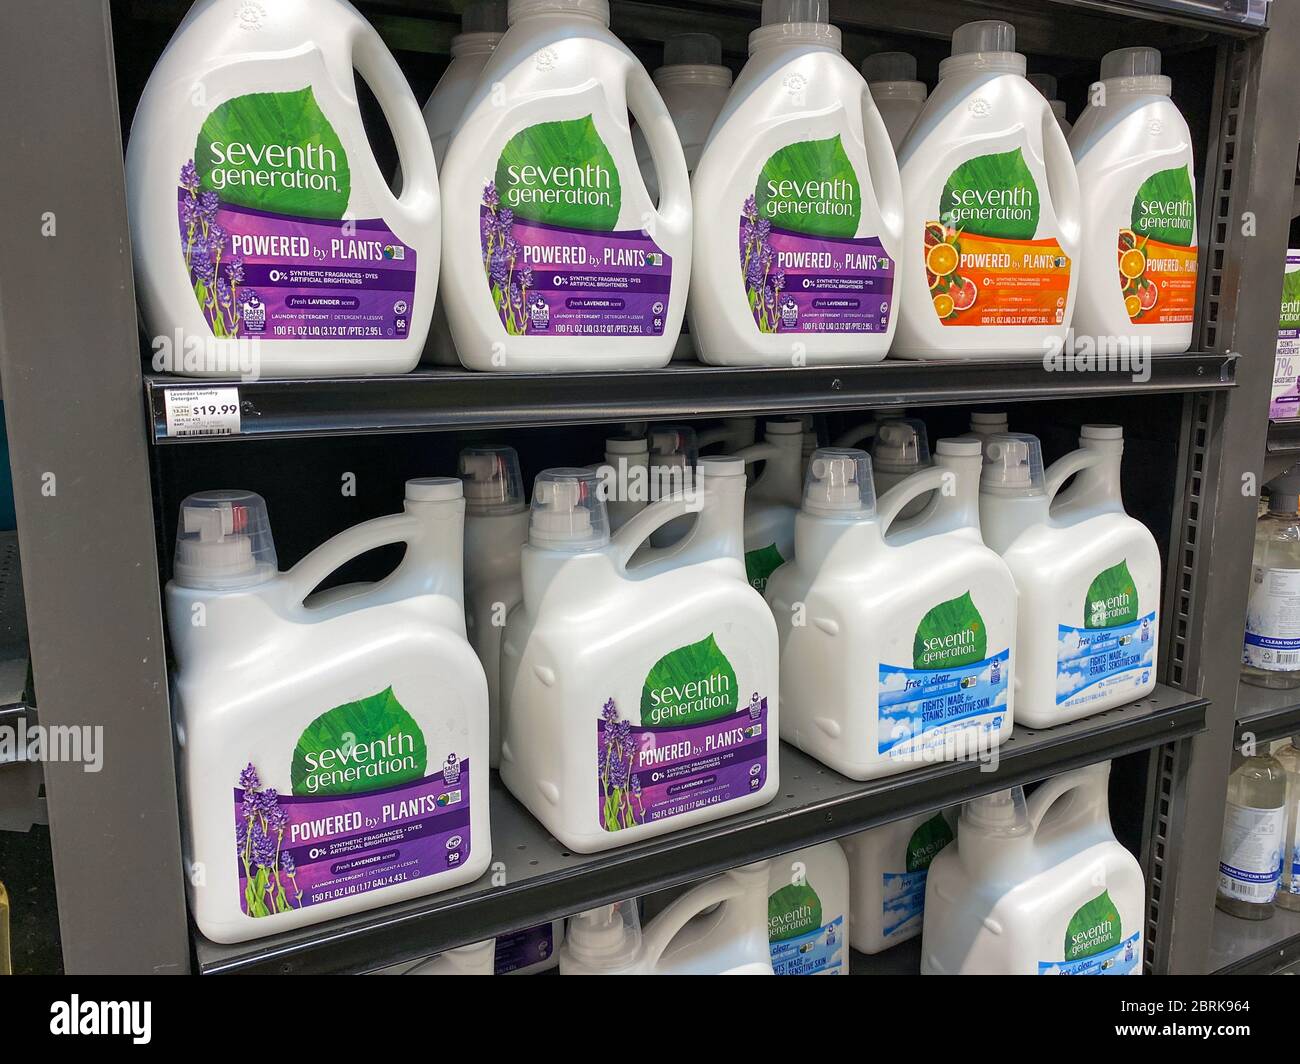 Orlando, FL/USA - 5/10/20: A display of Seventh Generation Laundry Detergent at a Whole Foods Market grocery store. Stock Photo